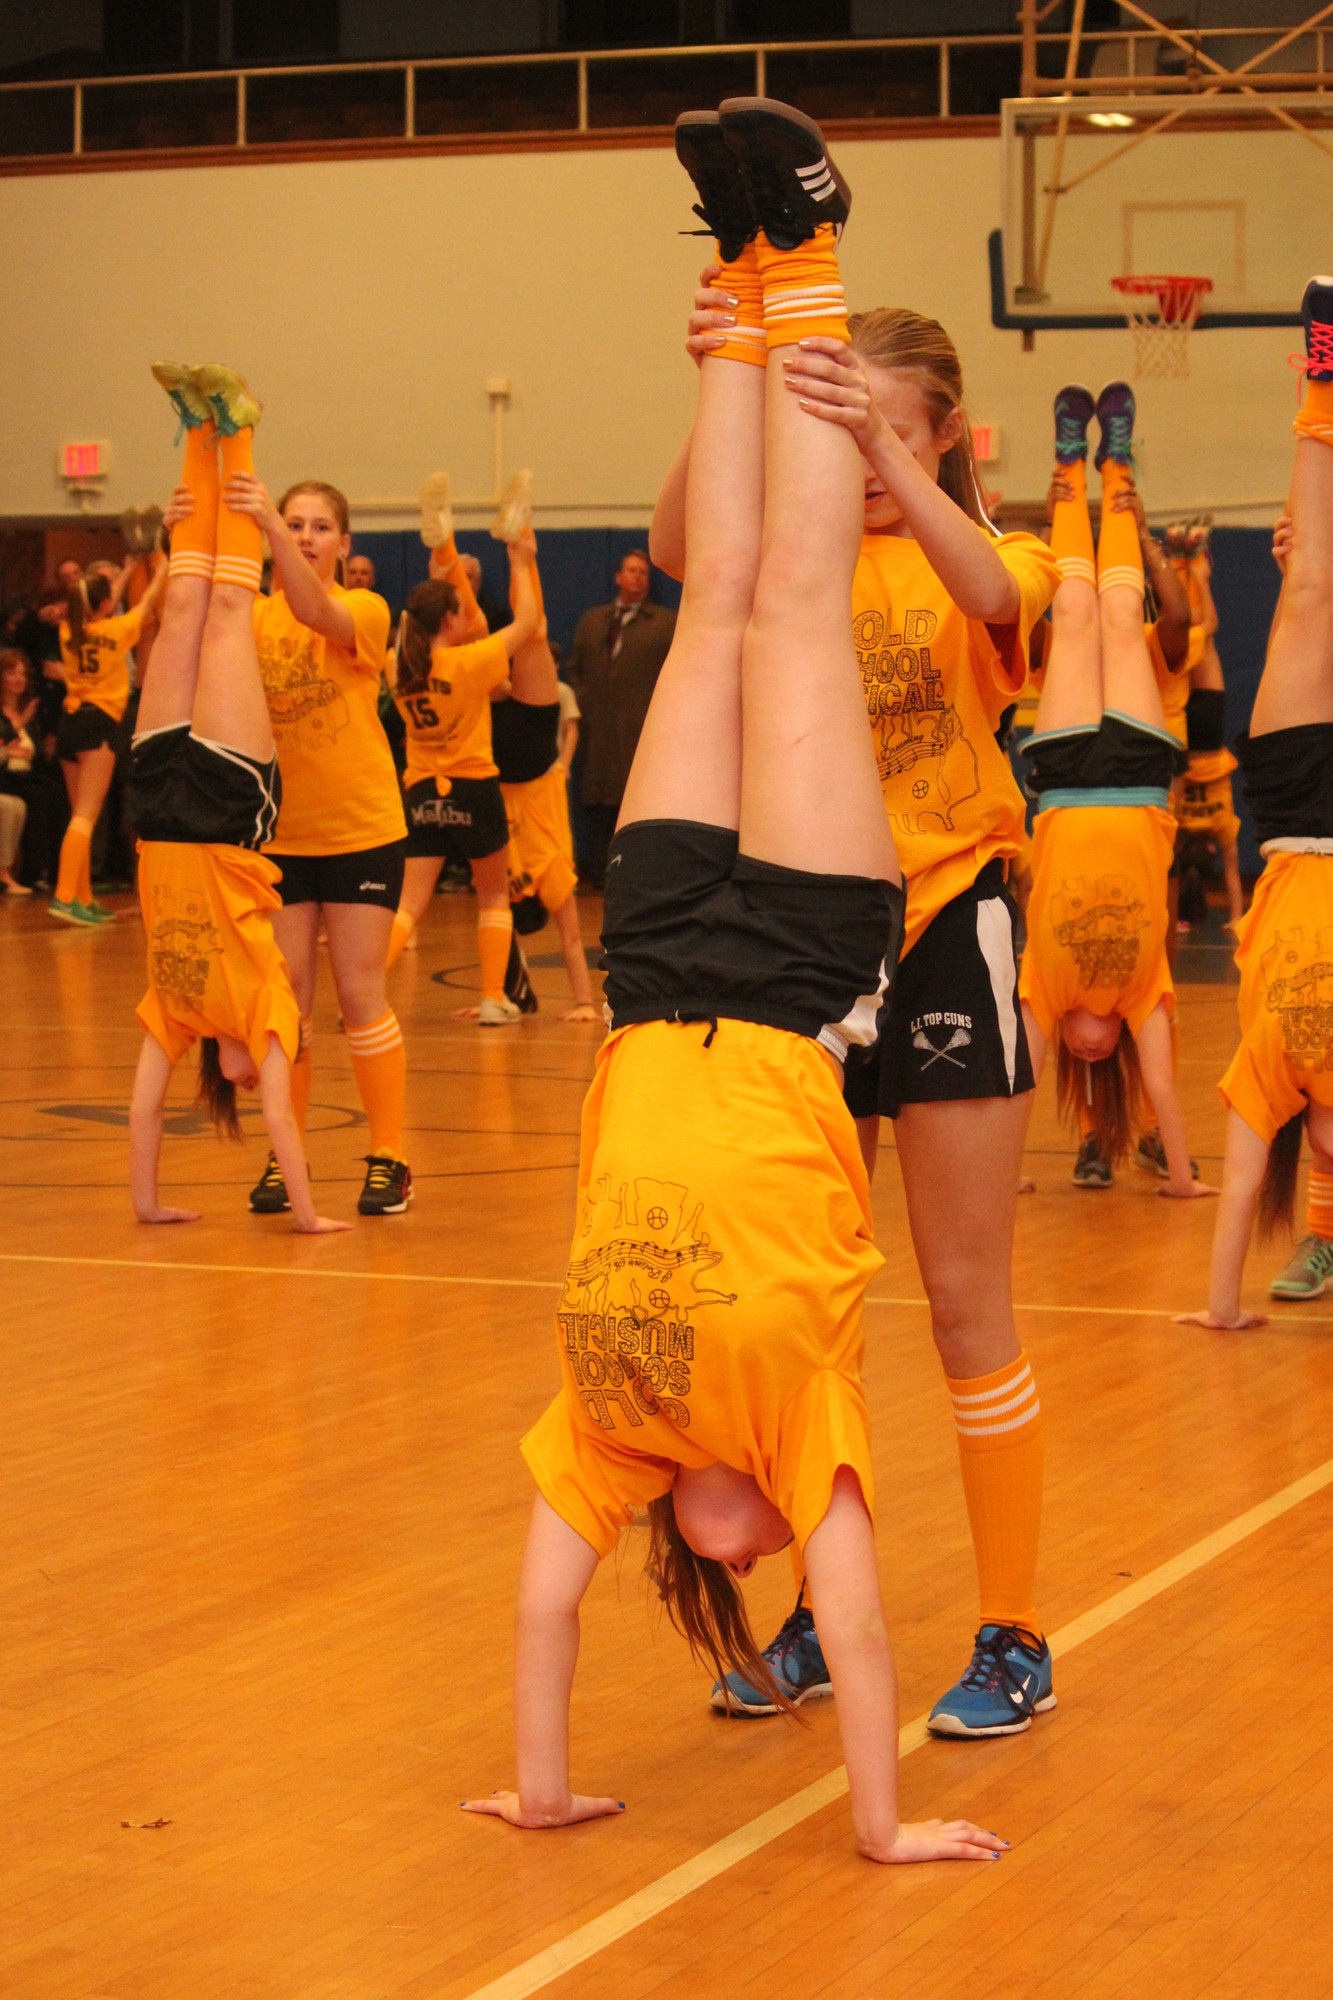 The Gold Team performed the acrobatic moves that the students coordinated.